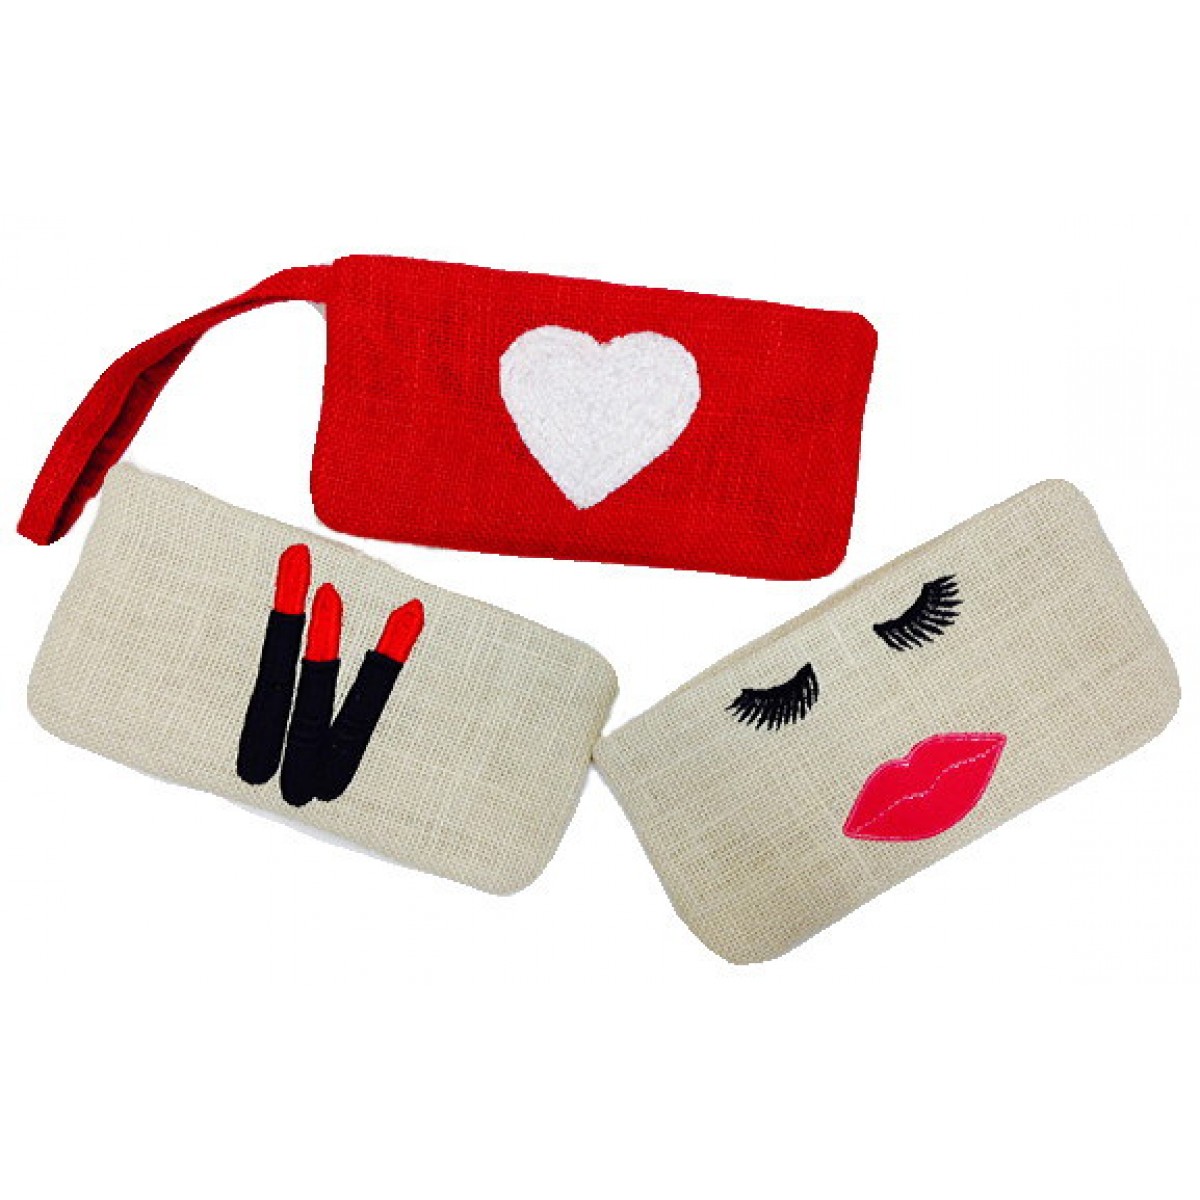 Wristlet With Heart, Lips or Lipsticks